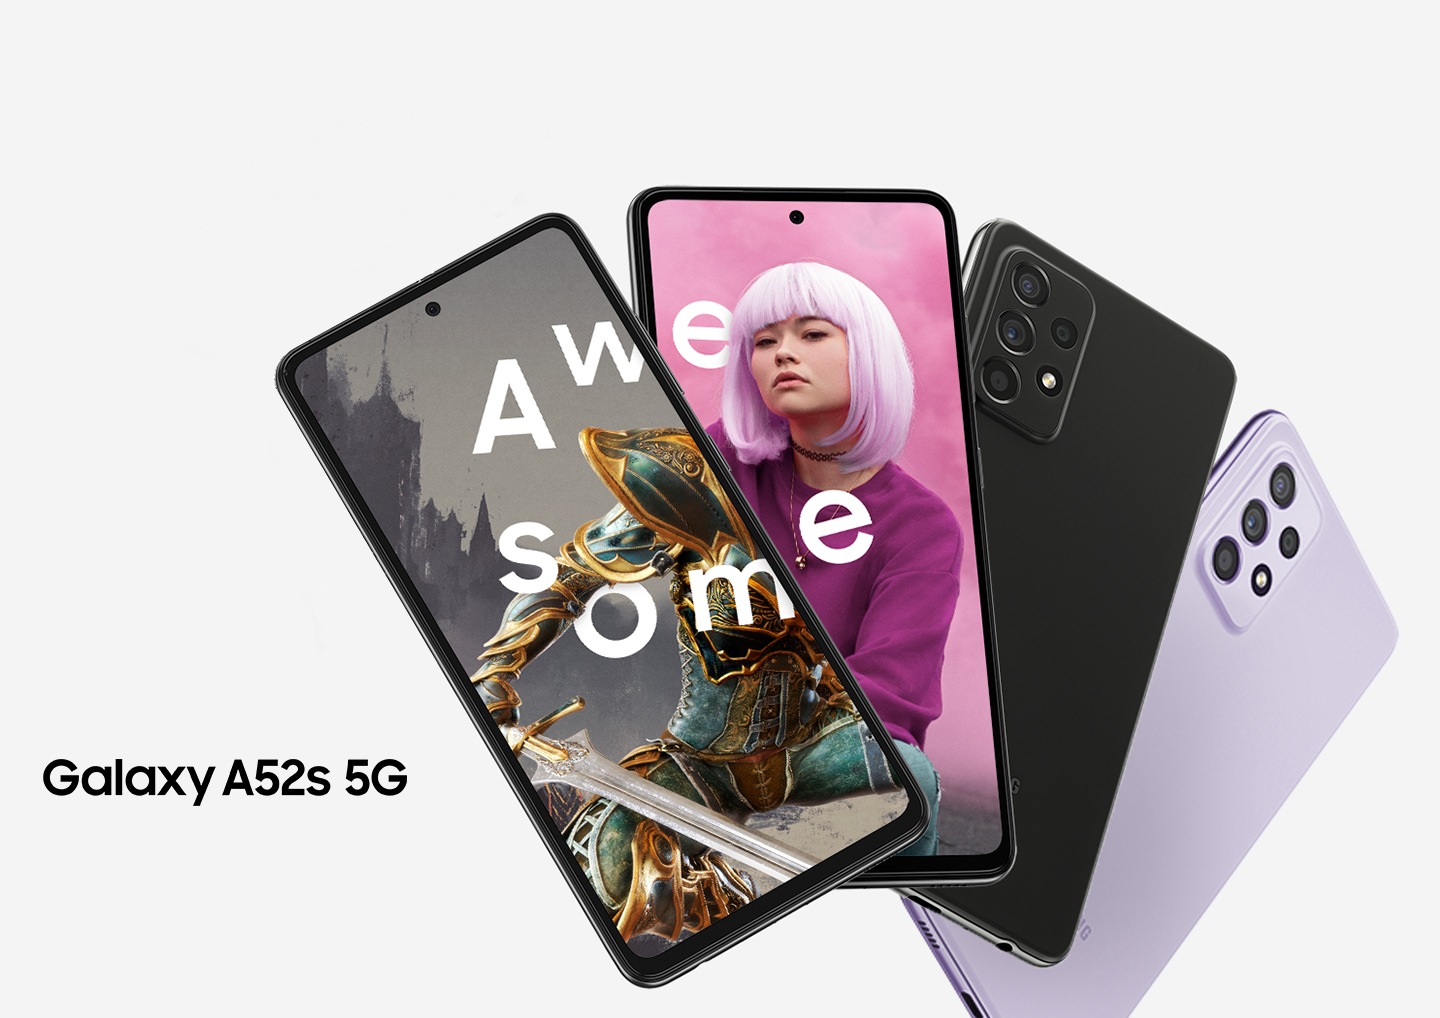 Three Galaxy A52s 5G phones fanned out, two seen from the front and two seen from the rear. The one seen from the rear \ in Awesome Black. One phone has a scene from a video game onscreen, and the other displays a woman in a pink wig. Both phones have the word Awesome spread across it.